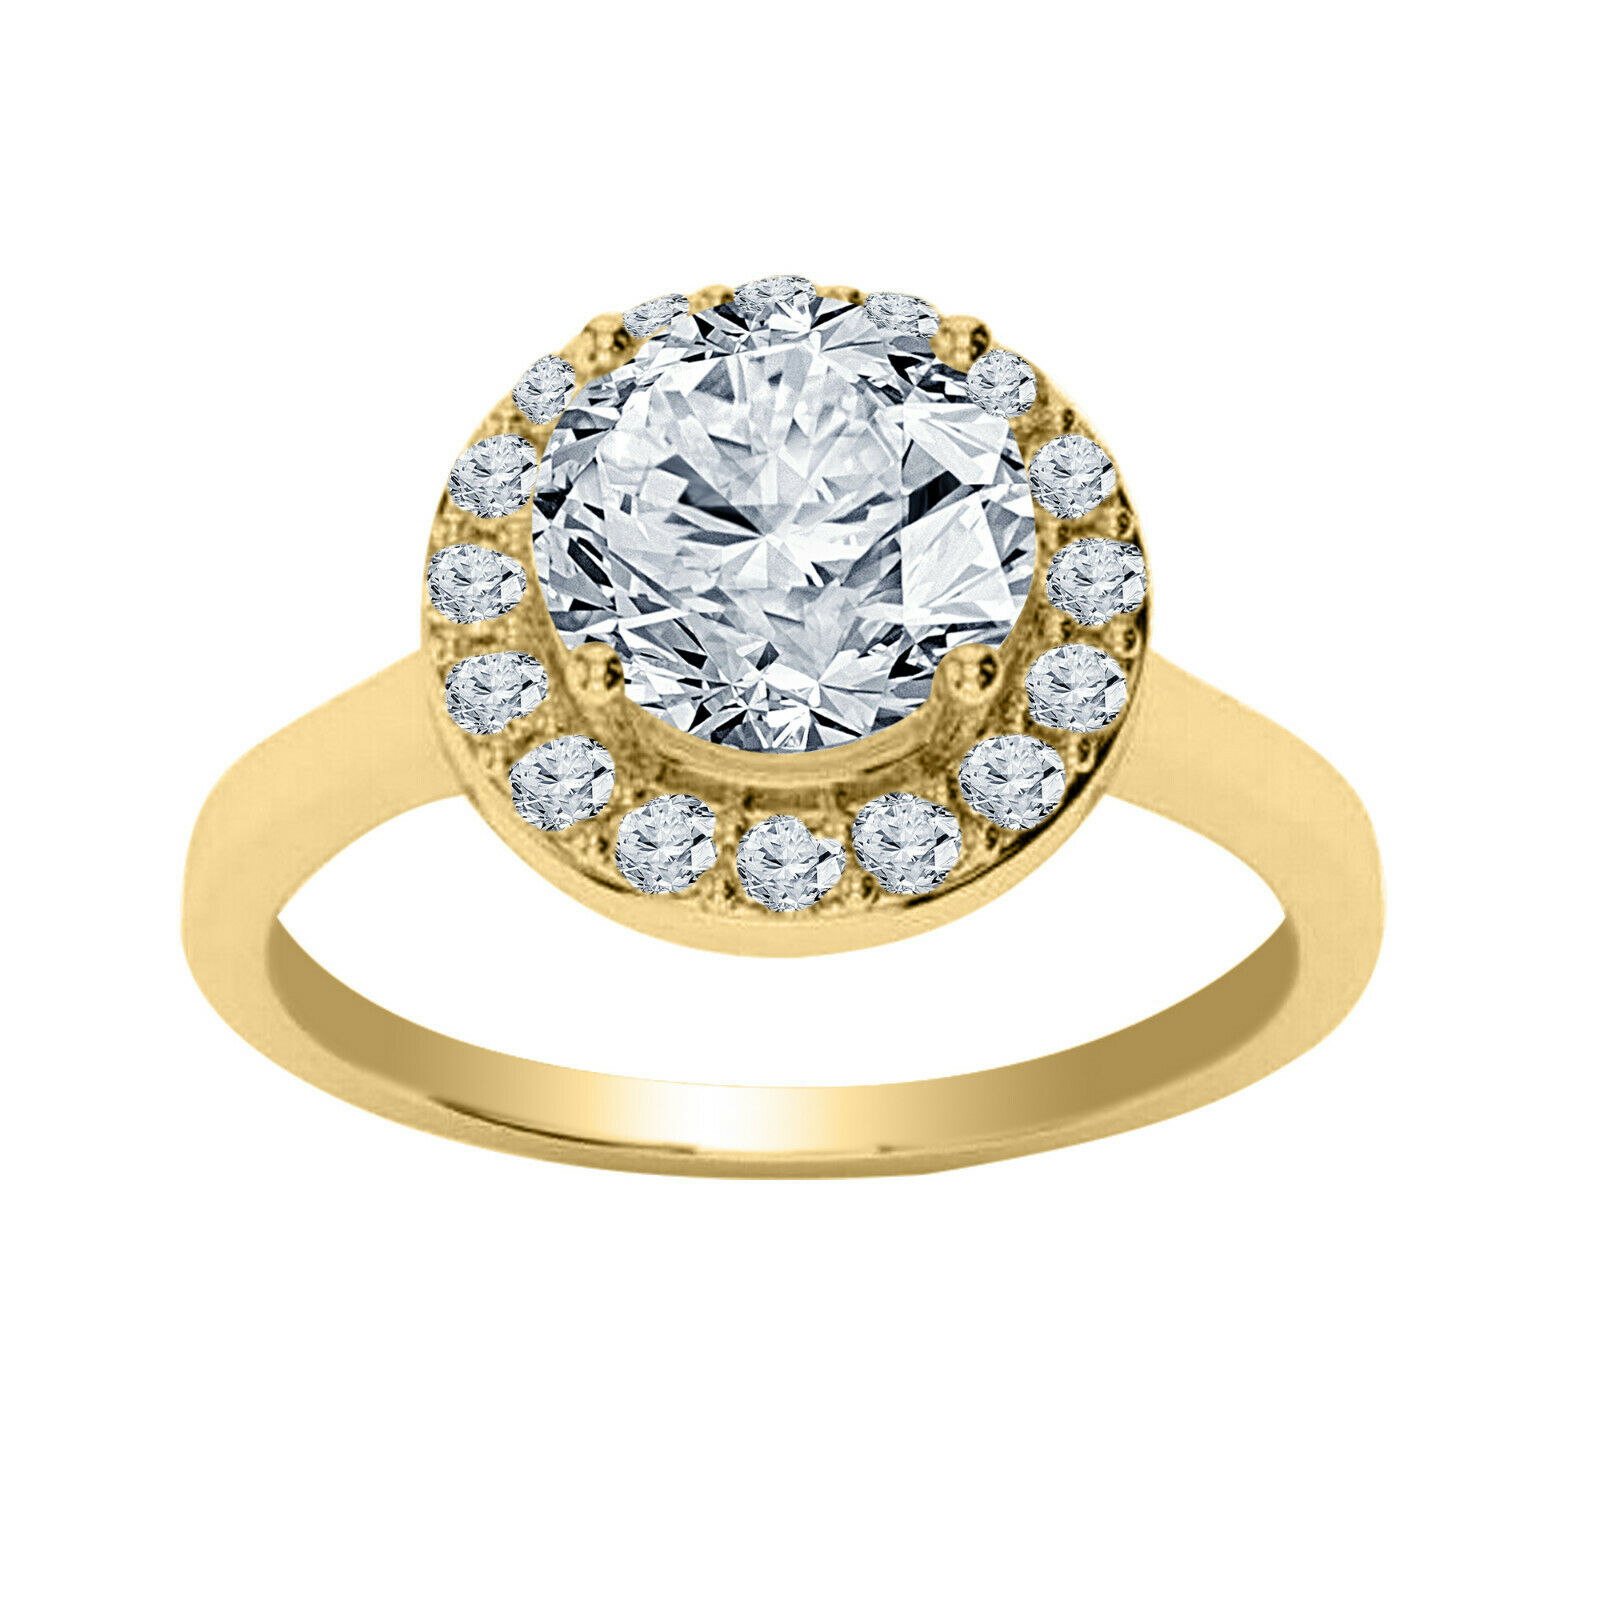 2.70ct Round Cut Solitaire Diamond Engagement Ring 14k Yellow Gold Over Jewelry